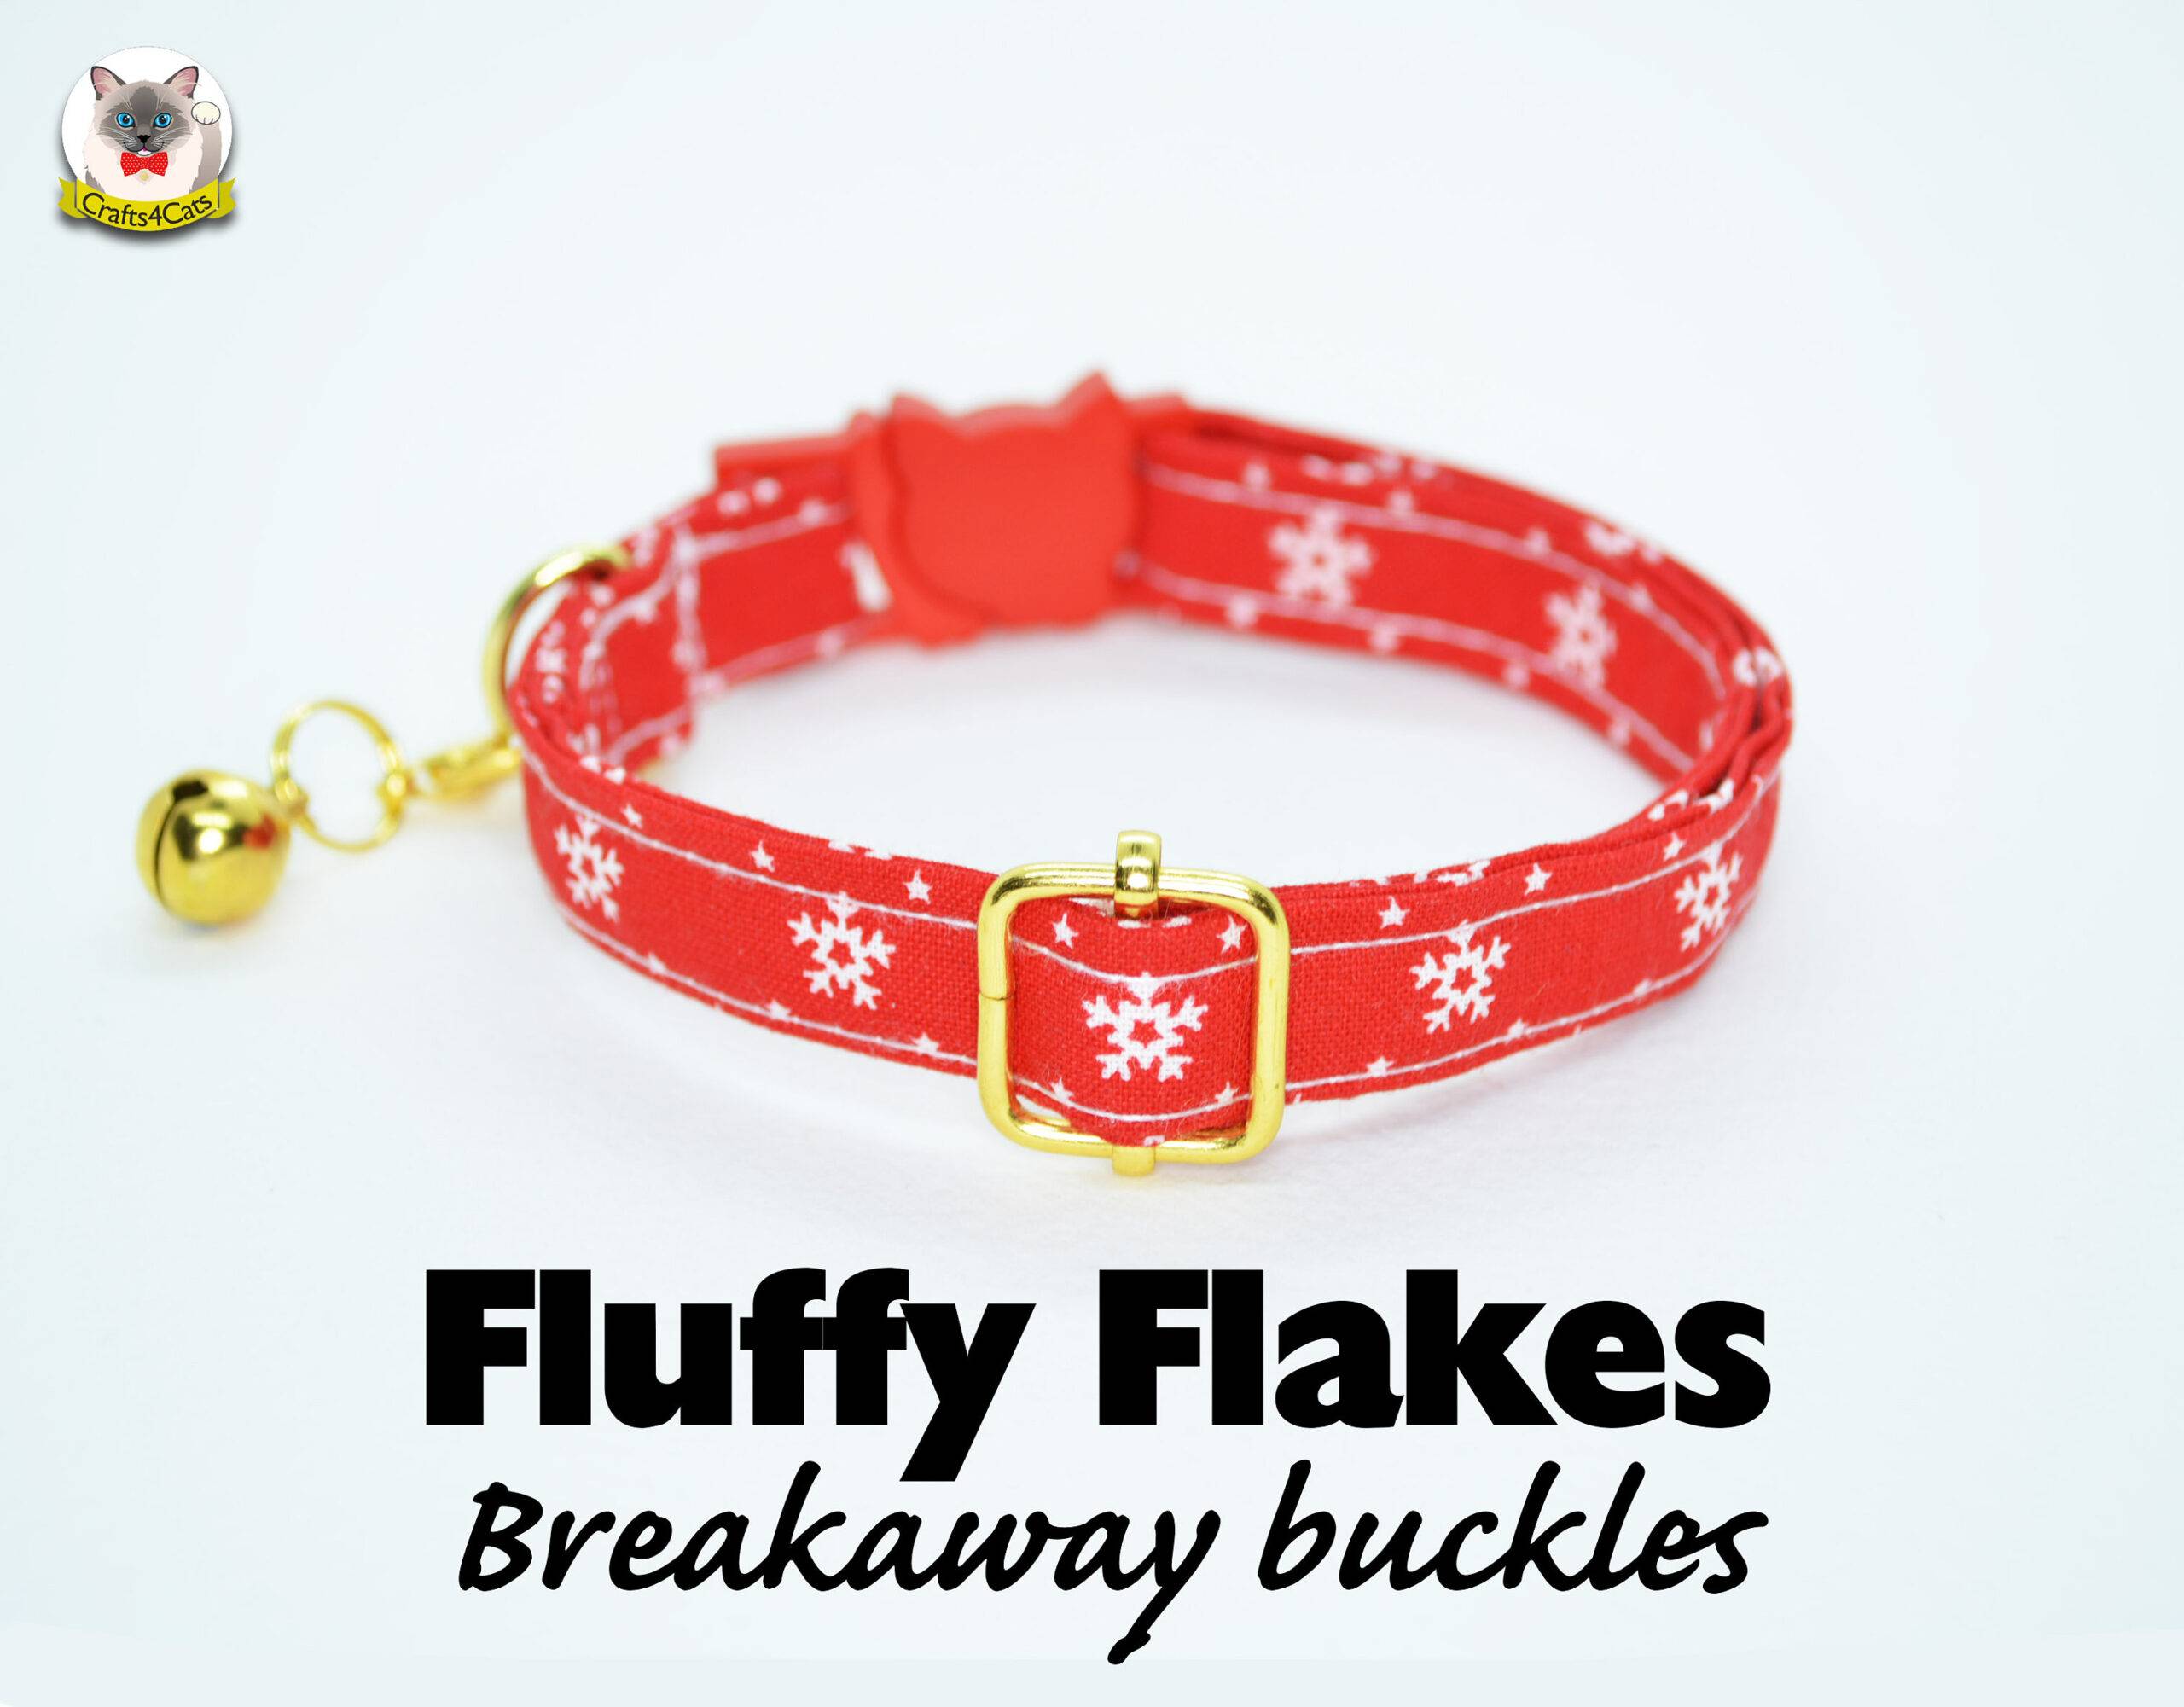 Cat Collar ‘Fluffy Flakes’ (breakaway) / Snowflakes cat collar, cat kitten collar, dog collar, red cat collar, Christmas, winter,Crafts4Cats